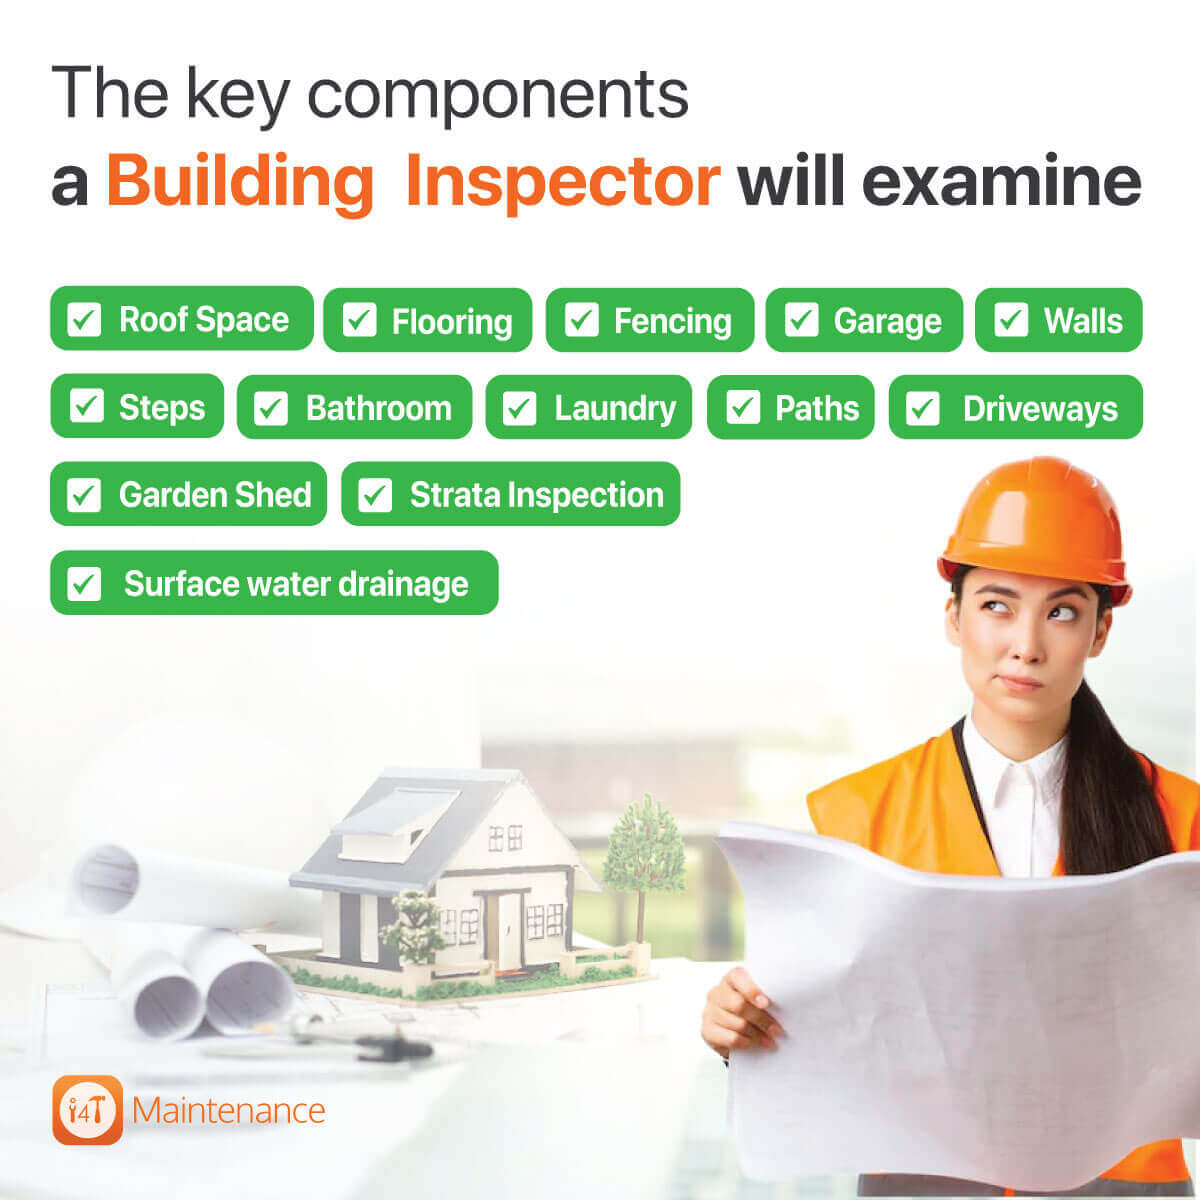 concern-building-pest-report - key components that building inspector inspects